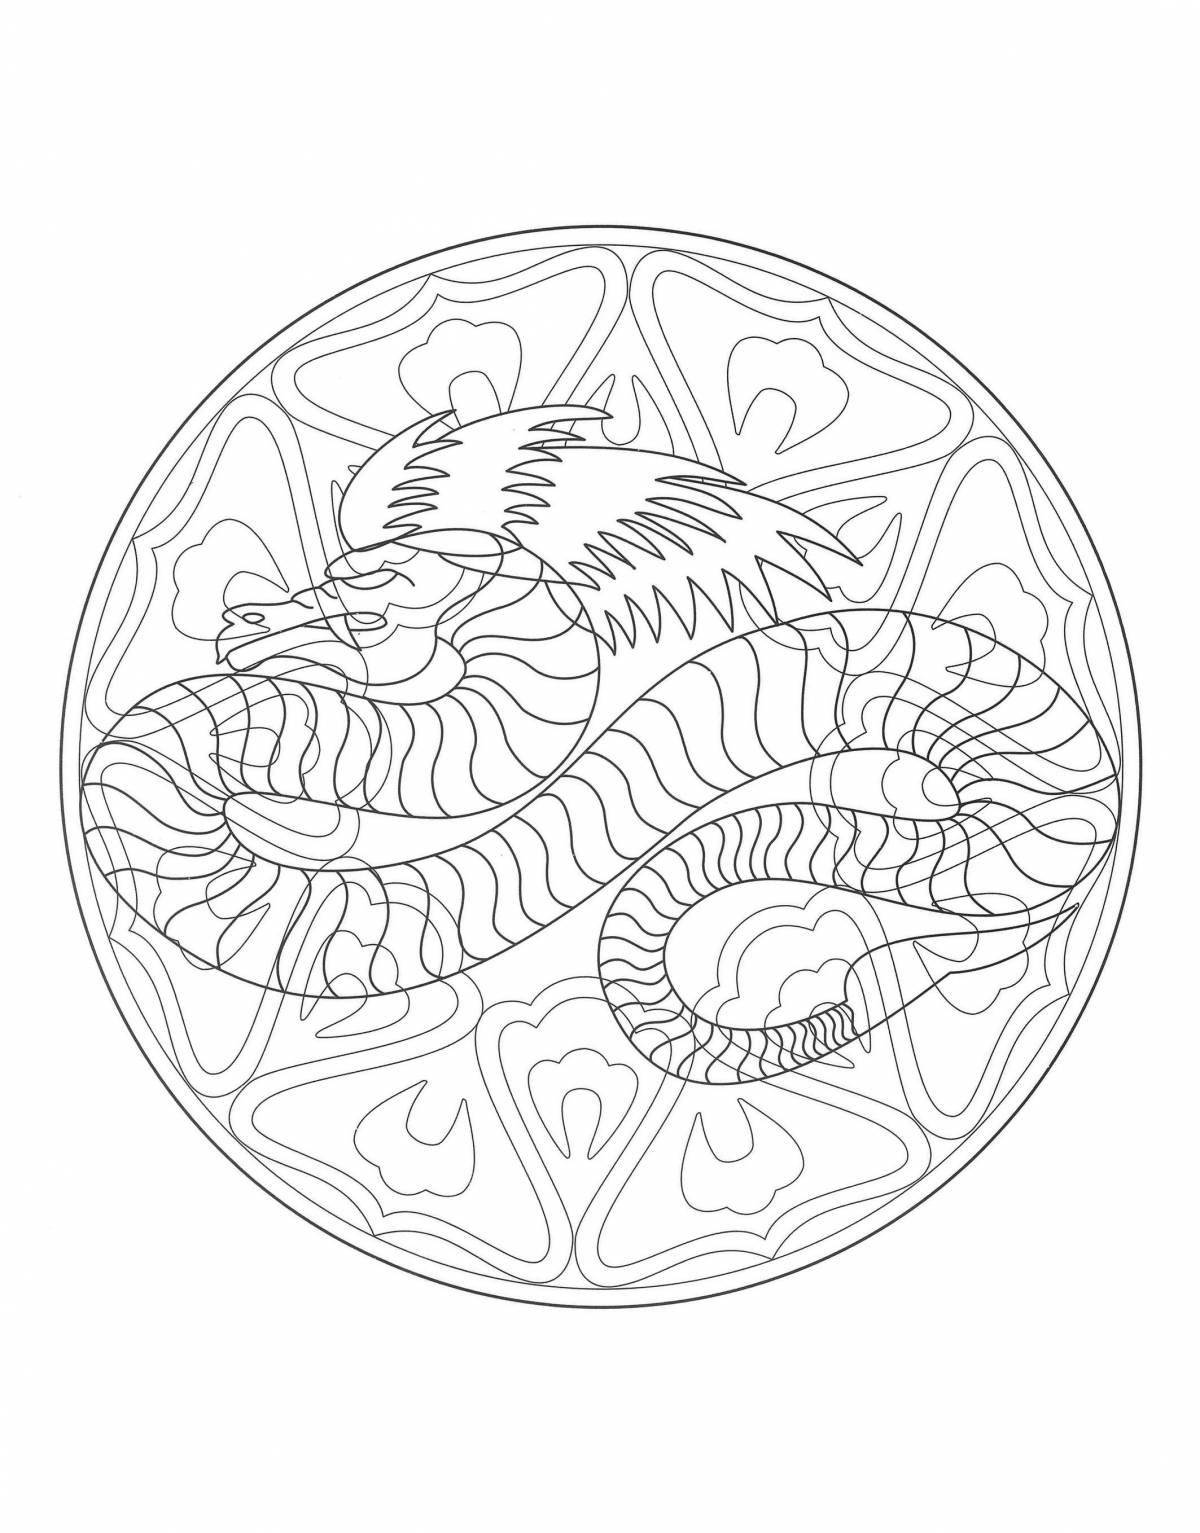 Coloring book relaxing anti-stress spirals